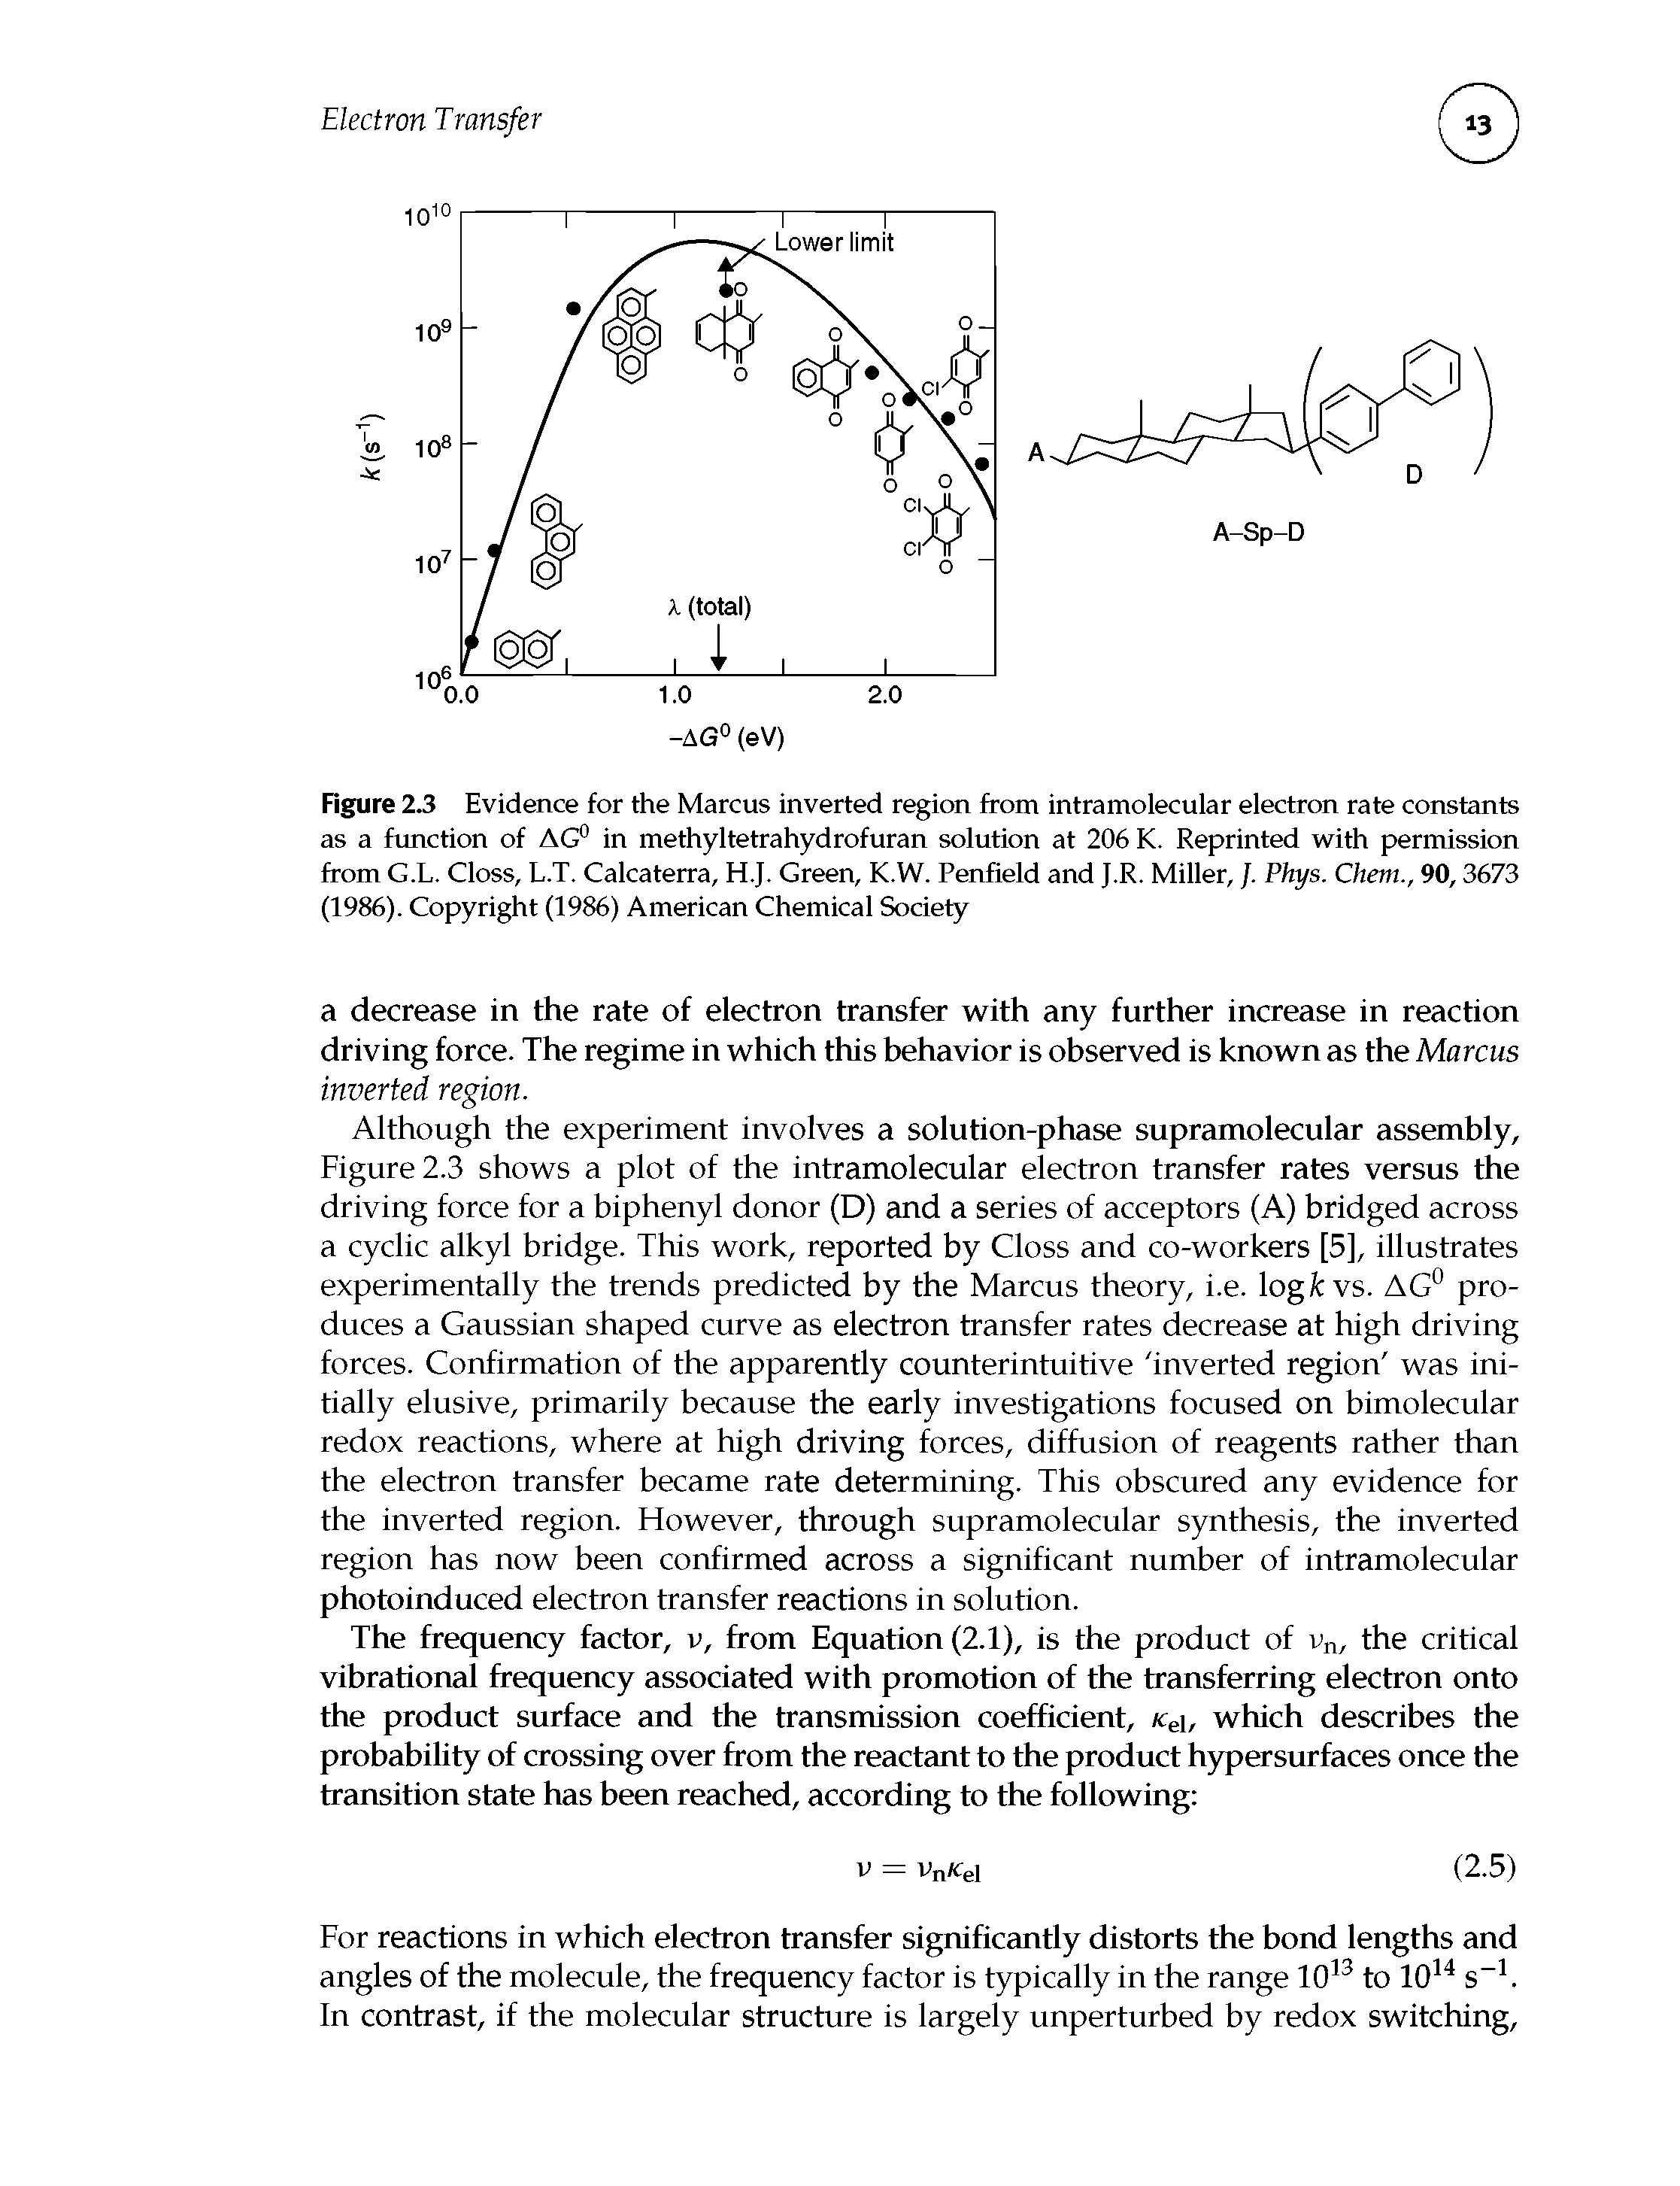 Figure 2.3 Evidence for the Marcus inverted region from intramolecular electron rate constants as a function of AG° in methyltetrahydrofuran solution at 206 K. Reprinted with permission from G.L. Closs, L.T. Calcaterra, H.J. Green, K.W. Penfield and J.R. Miller, ]. Phys. Chem., 90,3673 (1986). Copyright (1986) American Chemical Society...